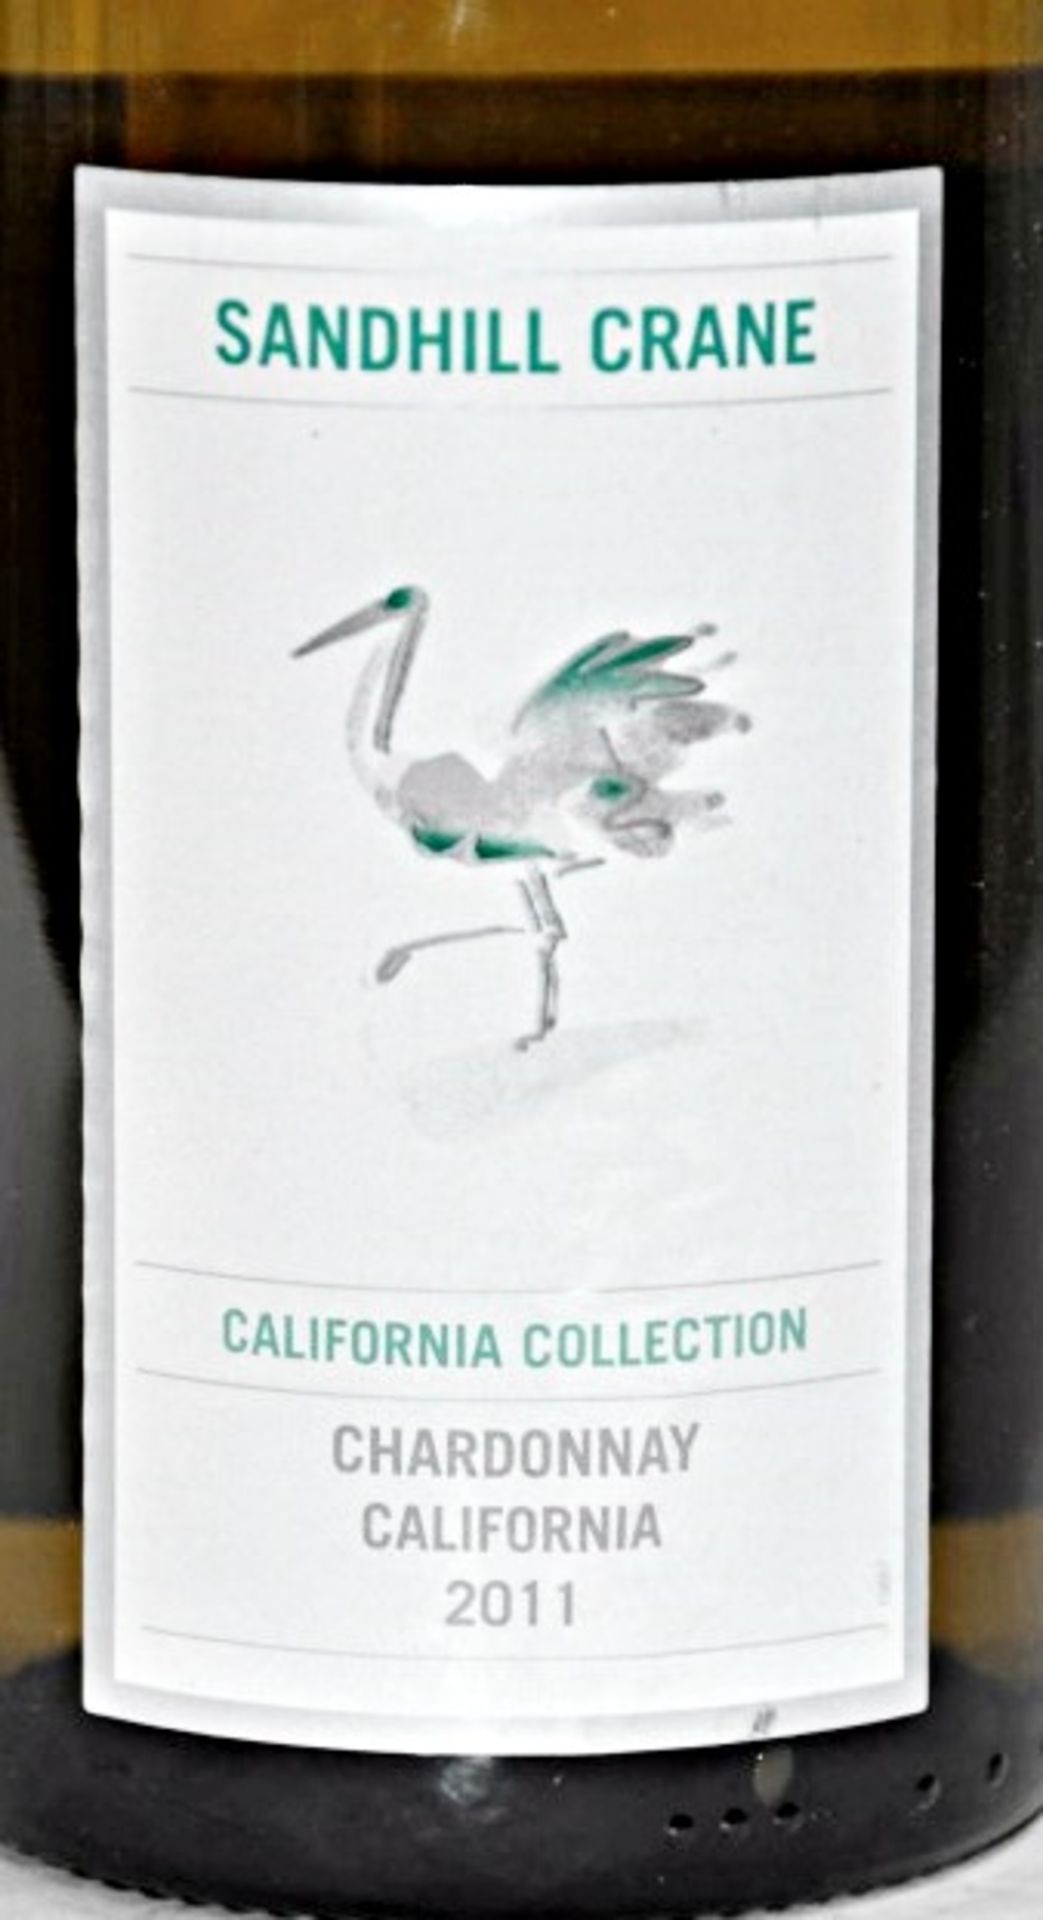 5 x Sandhill Crane California Collection Chardonnay, United States - 2011 – Bottle Size 75cl - - Image 2 of 3